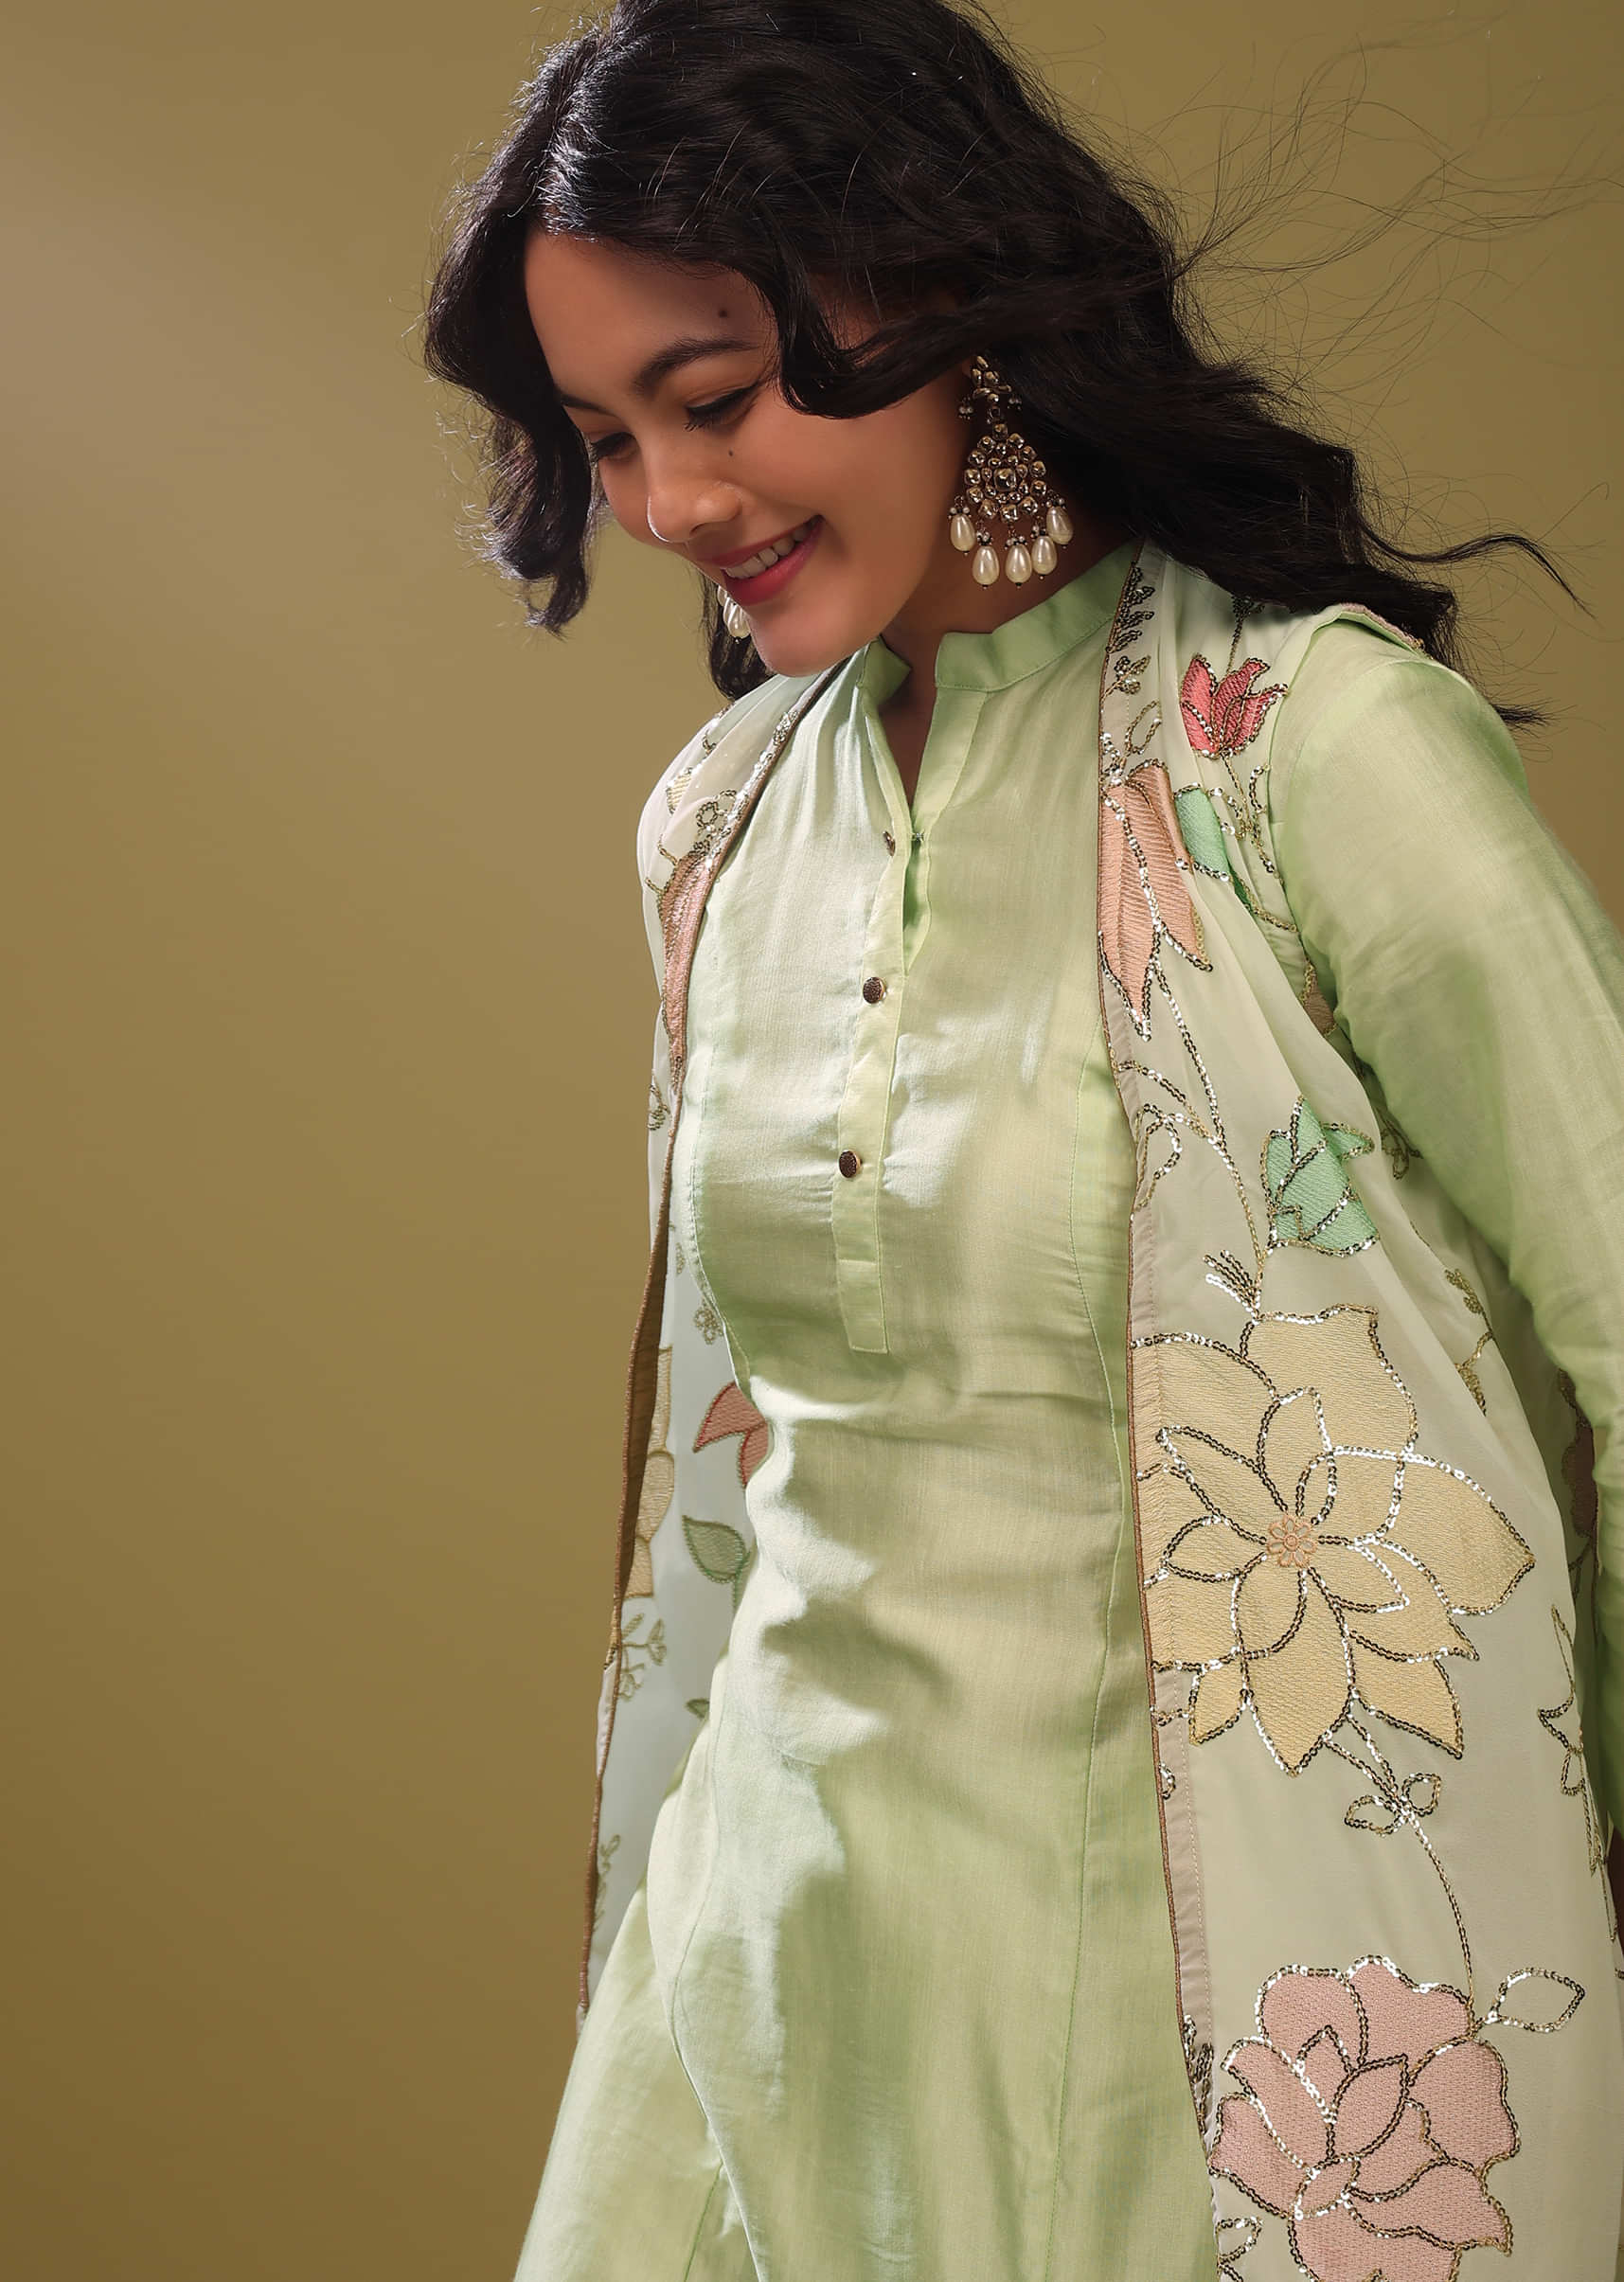 Festive Pista Green Princess Kurta With Cowl Pants And An Embroidered Floral Jacket